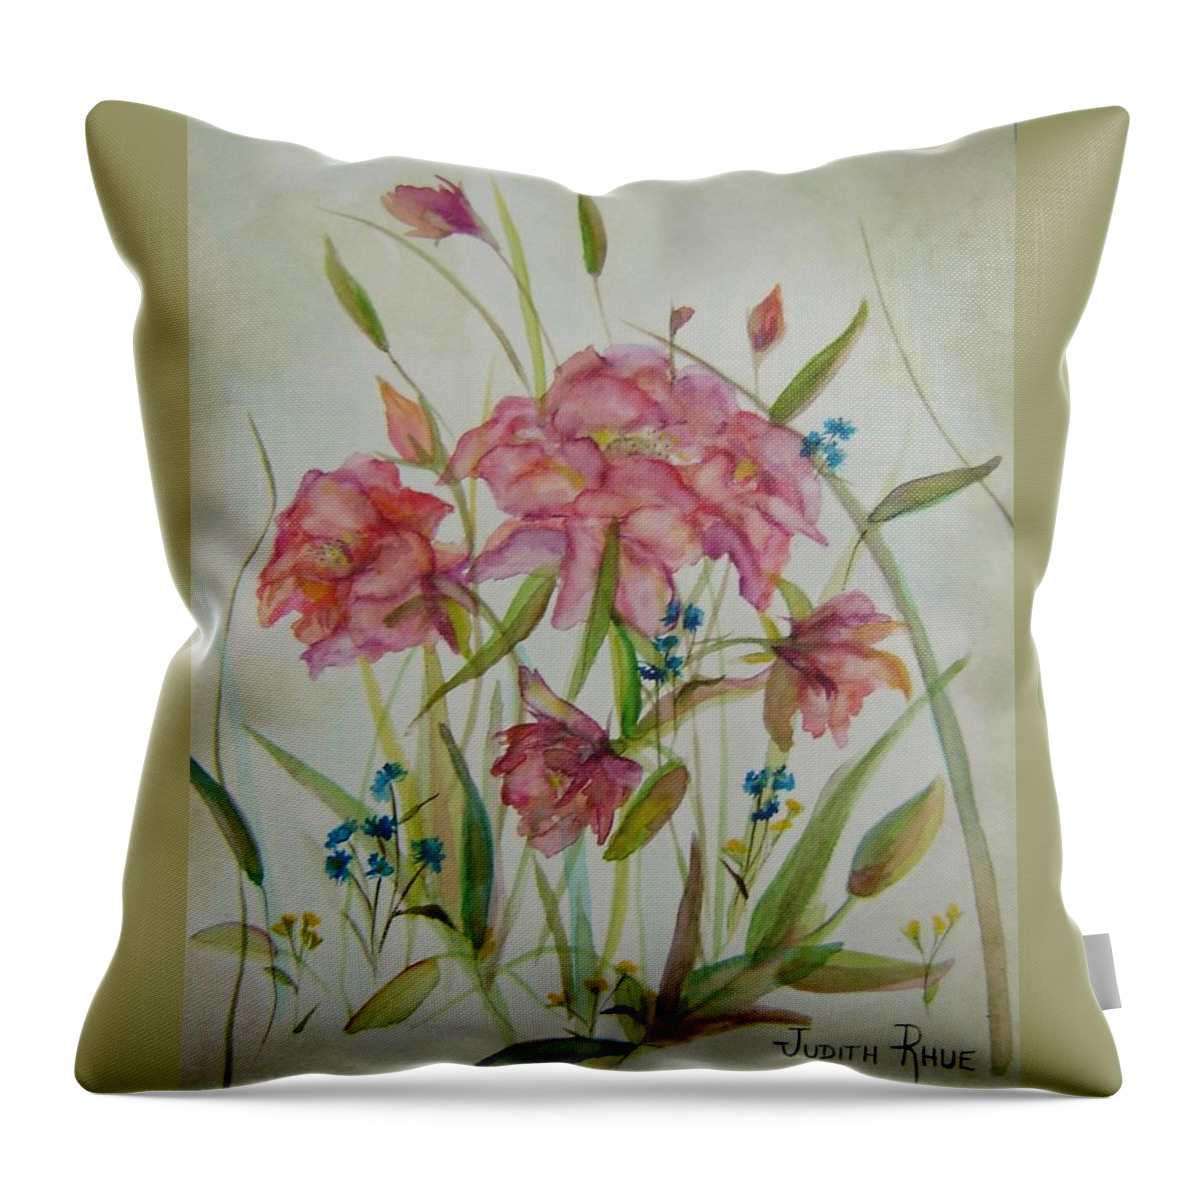 Wildflowers Throw Pillow featuring the painting Wildflowers by Judith Rhue